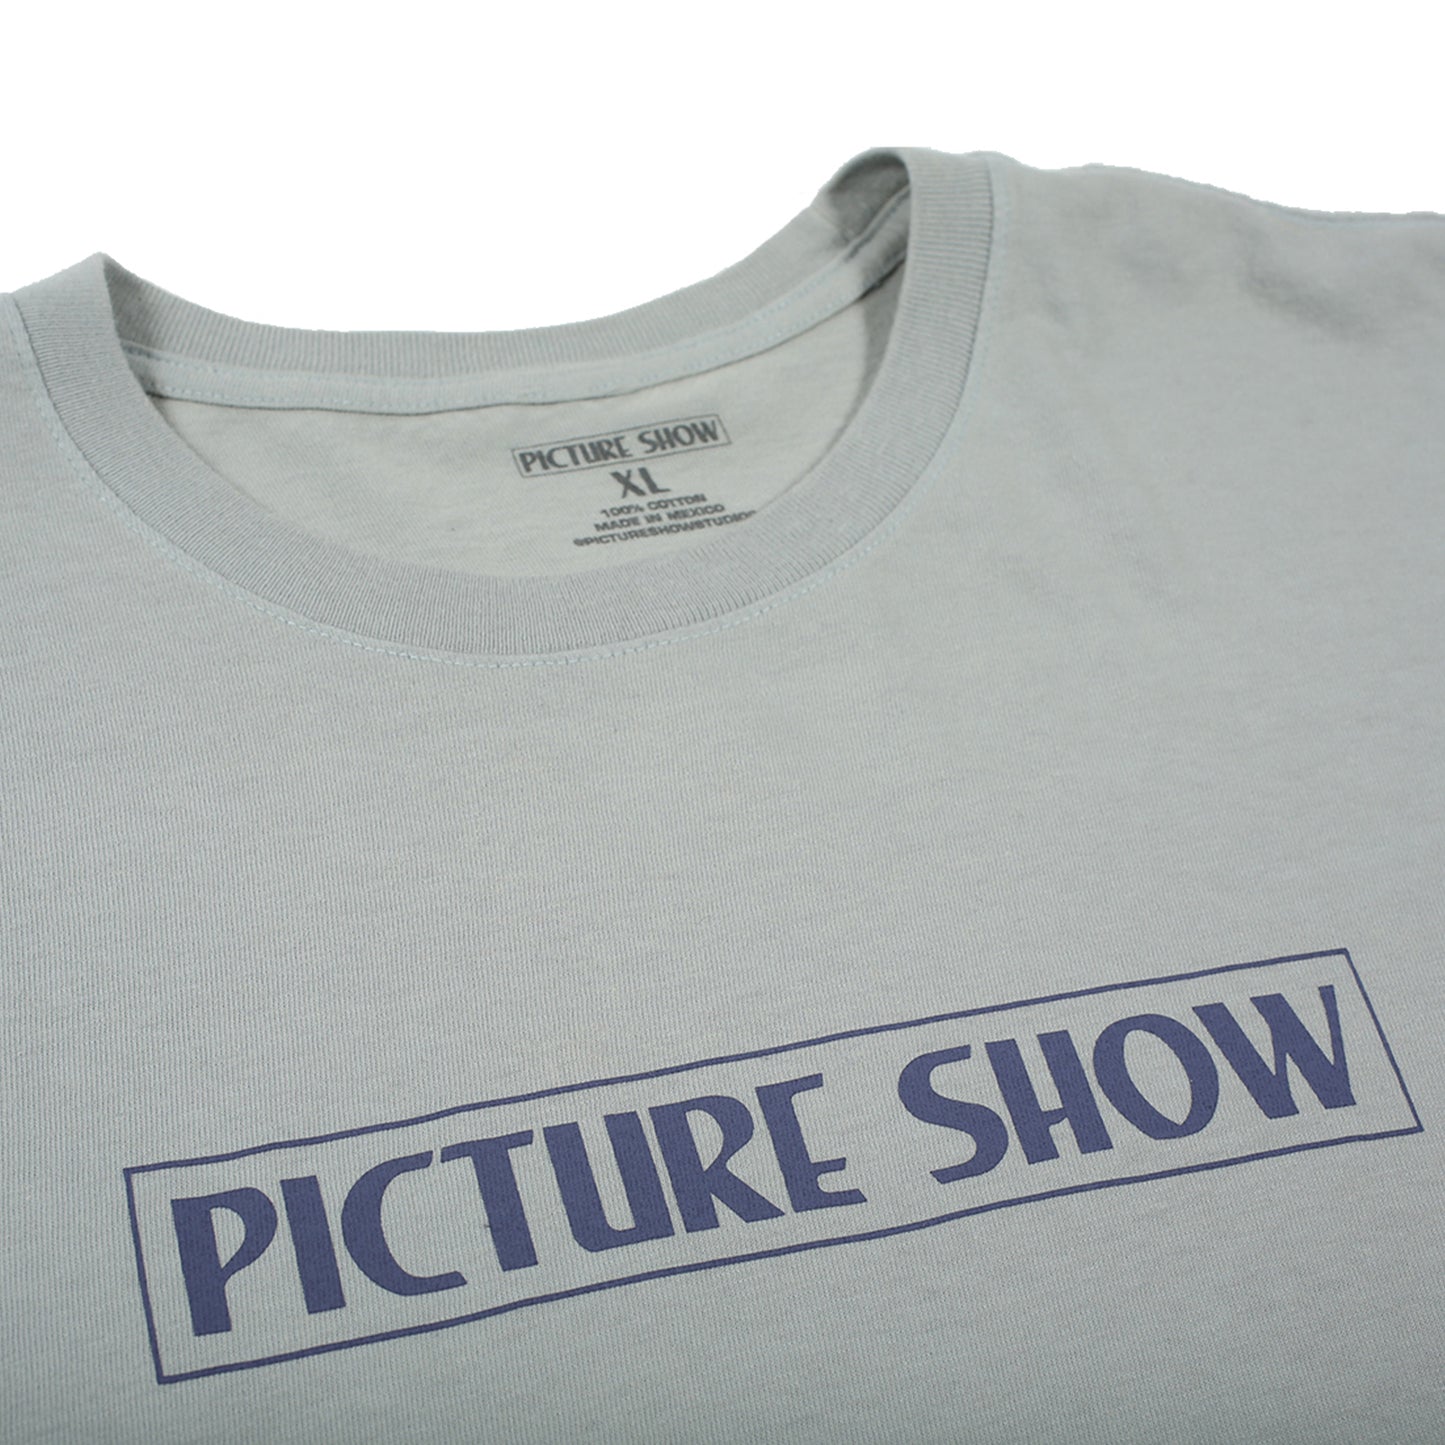 PICTURE SHOW VHS TEE - DOVE GREY